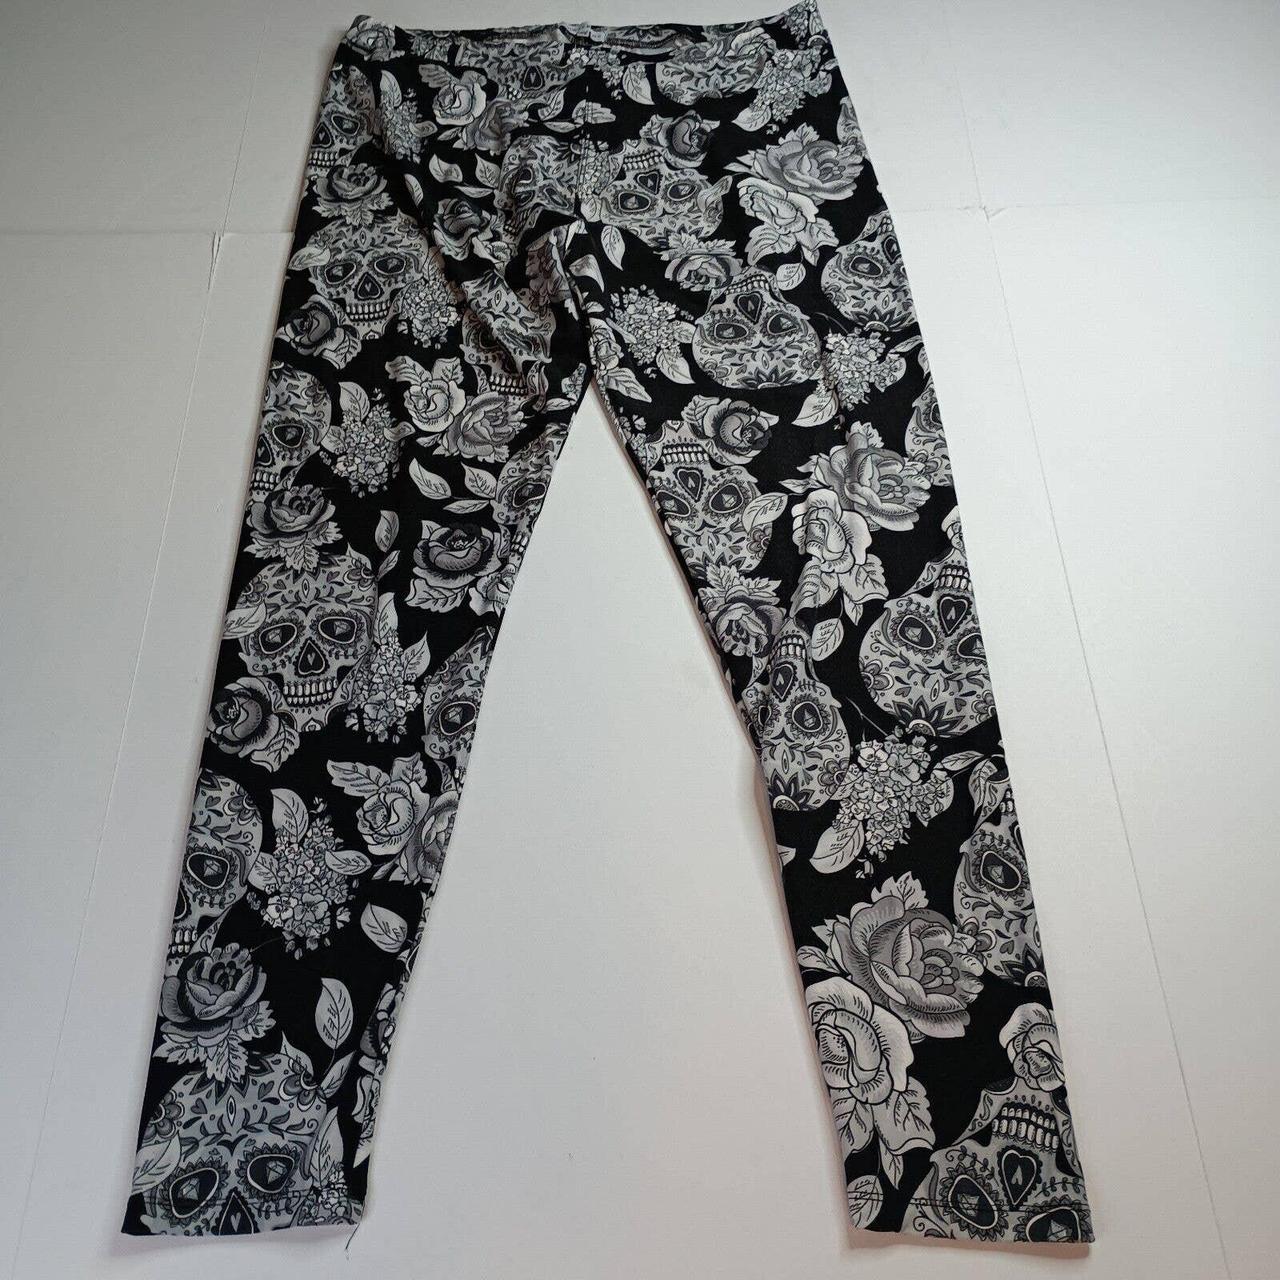 Make a statement with the perfect leggings for any activity